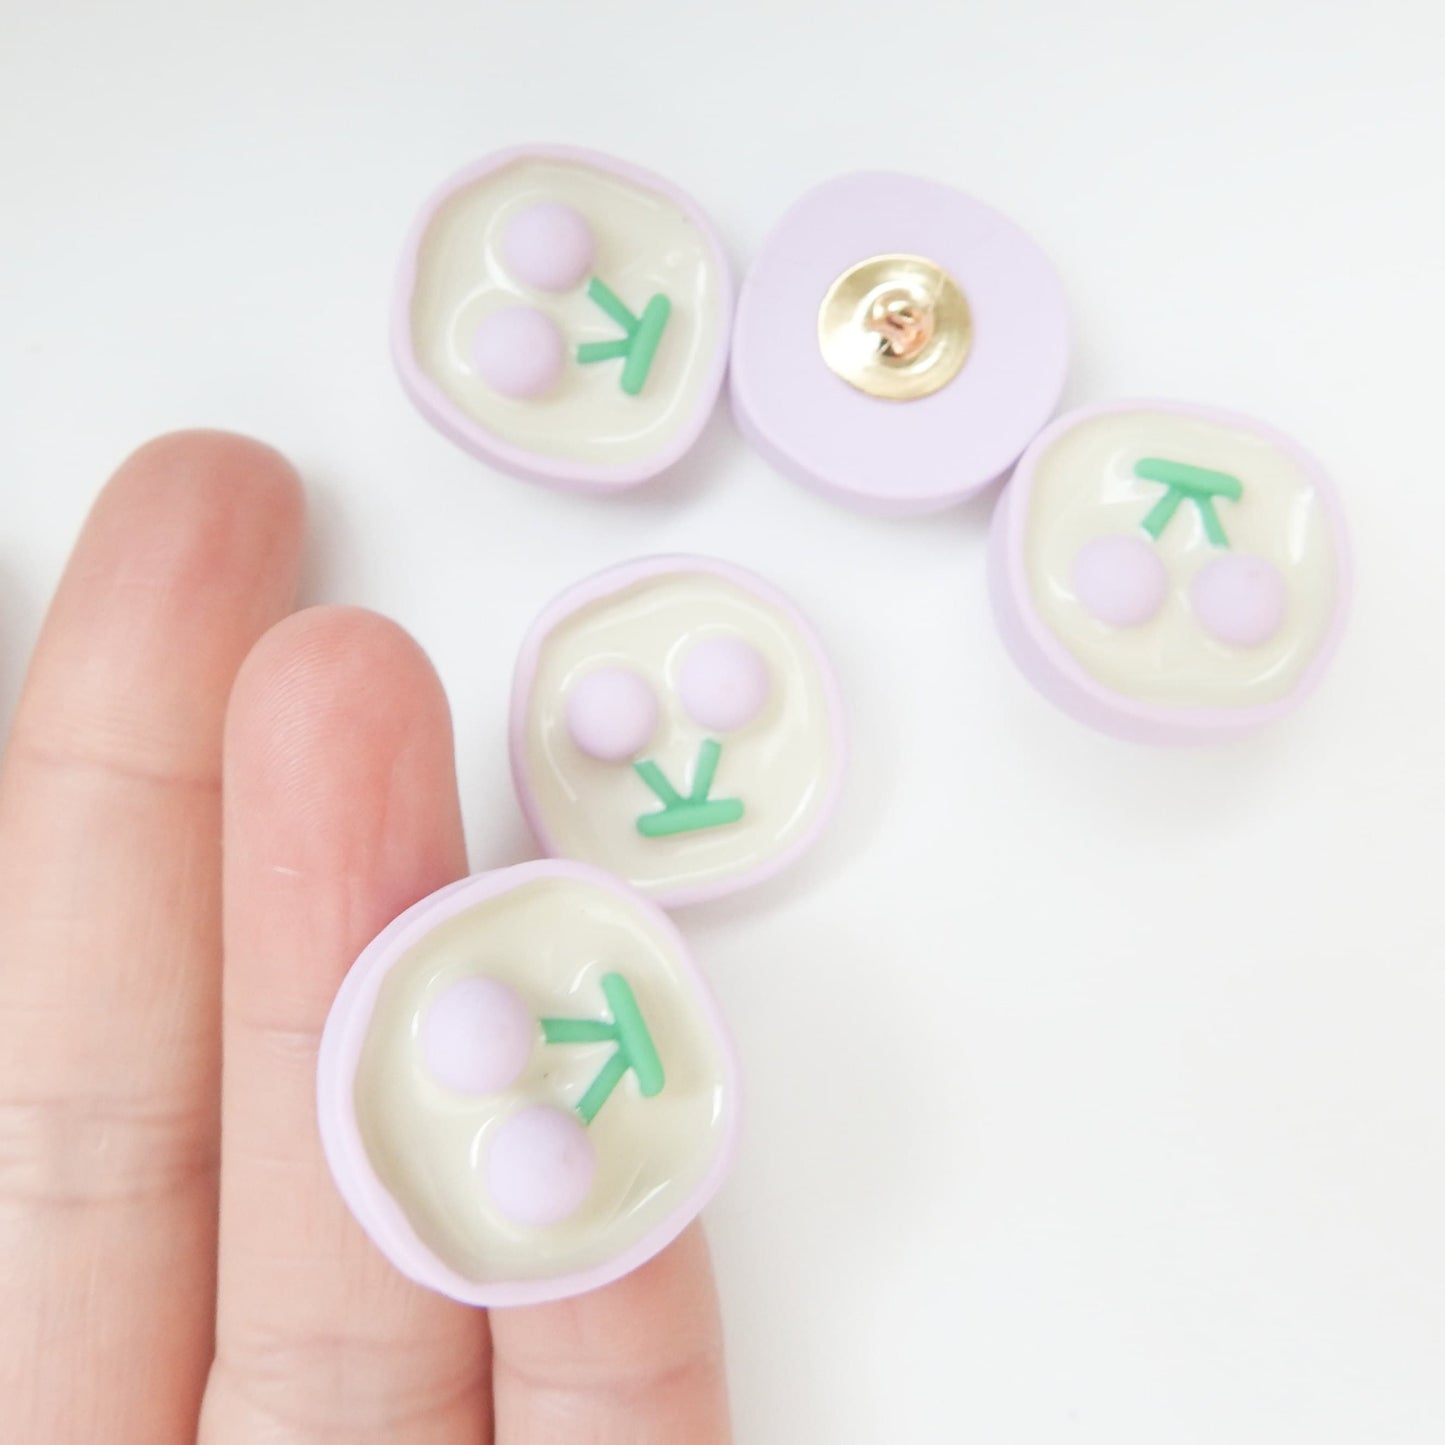 Cherry Decorative Buttons for sewing